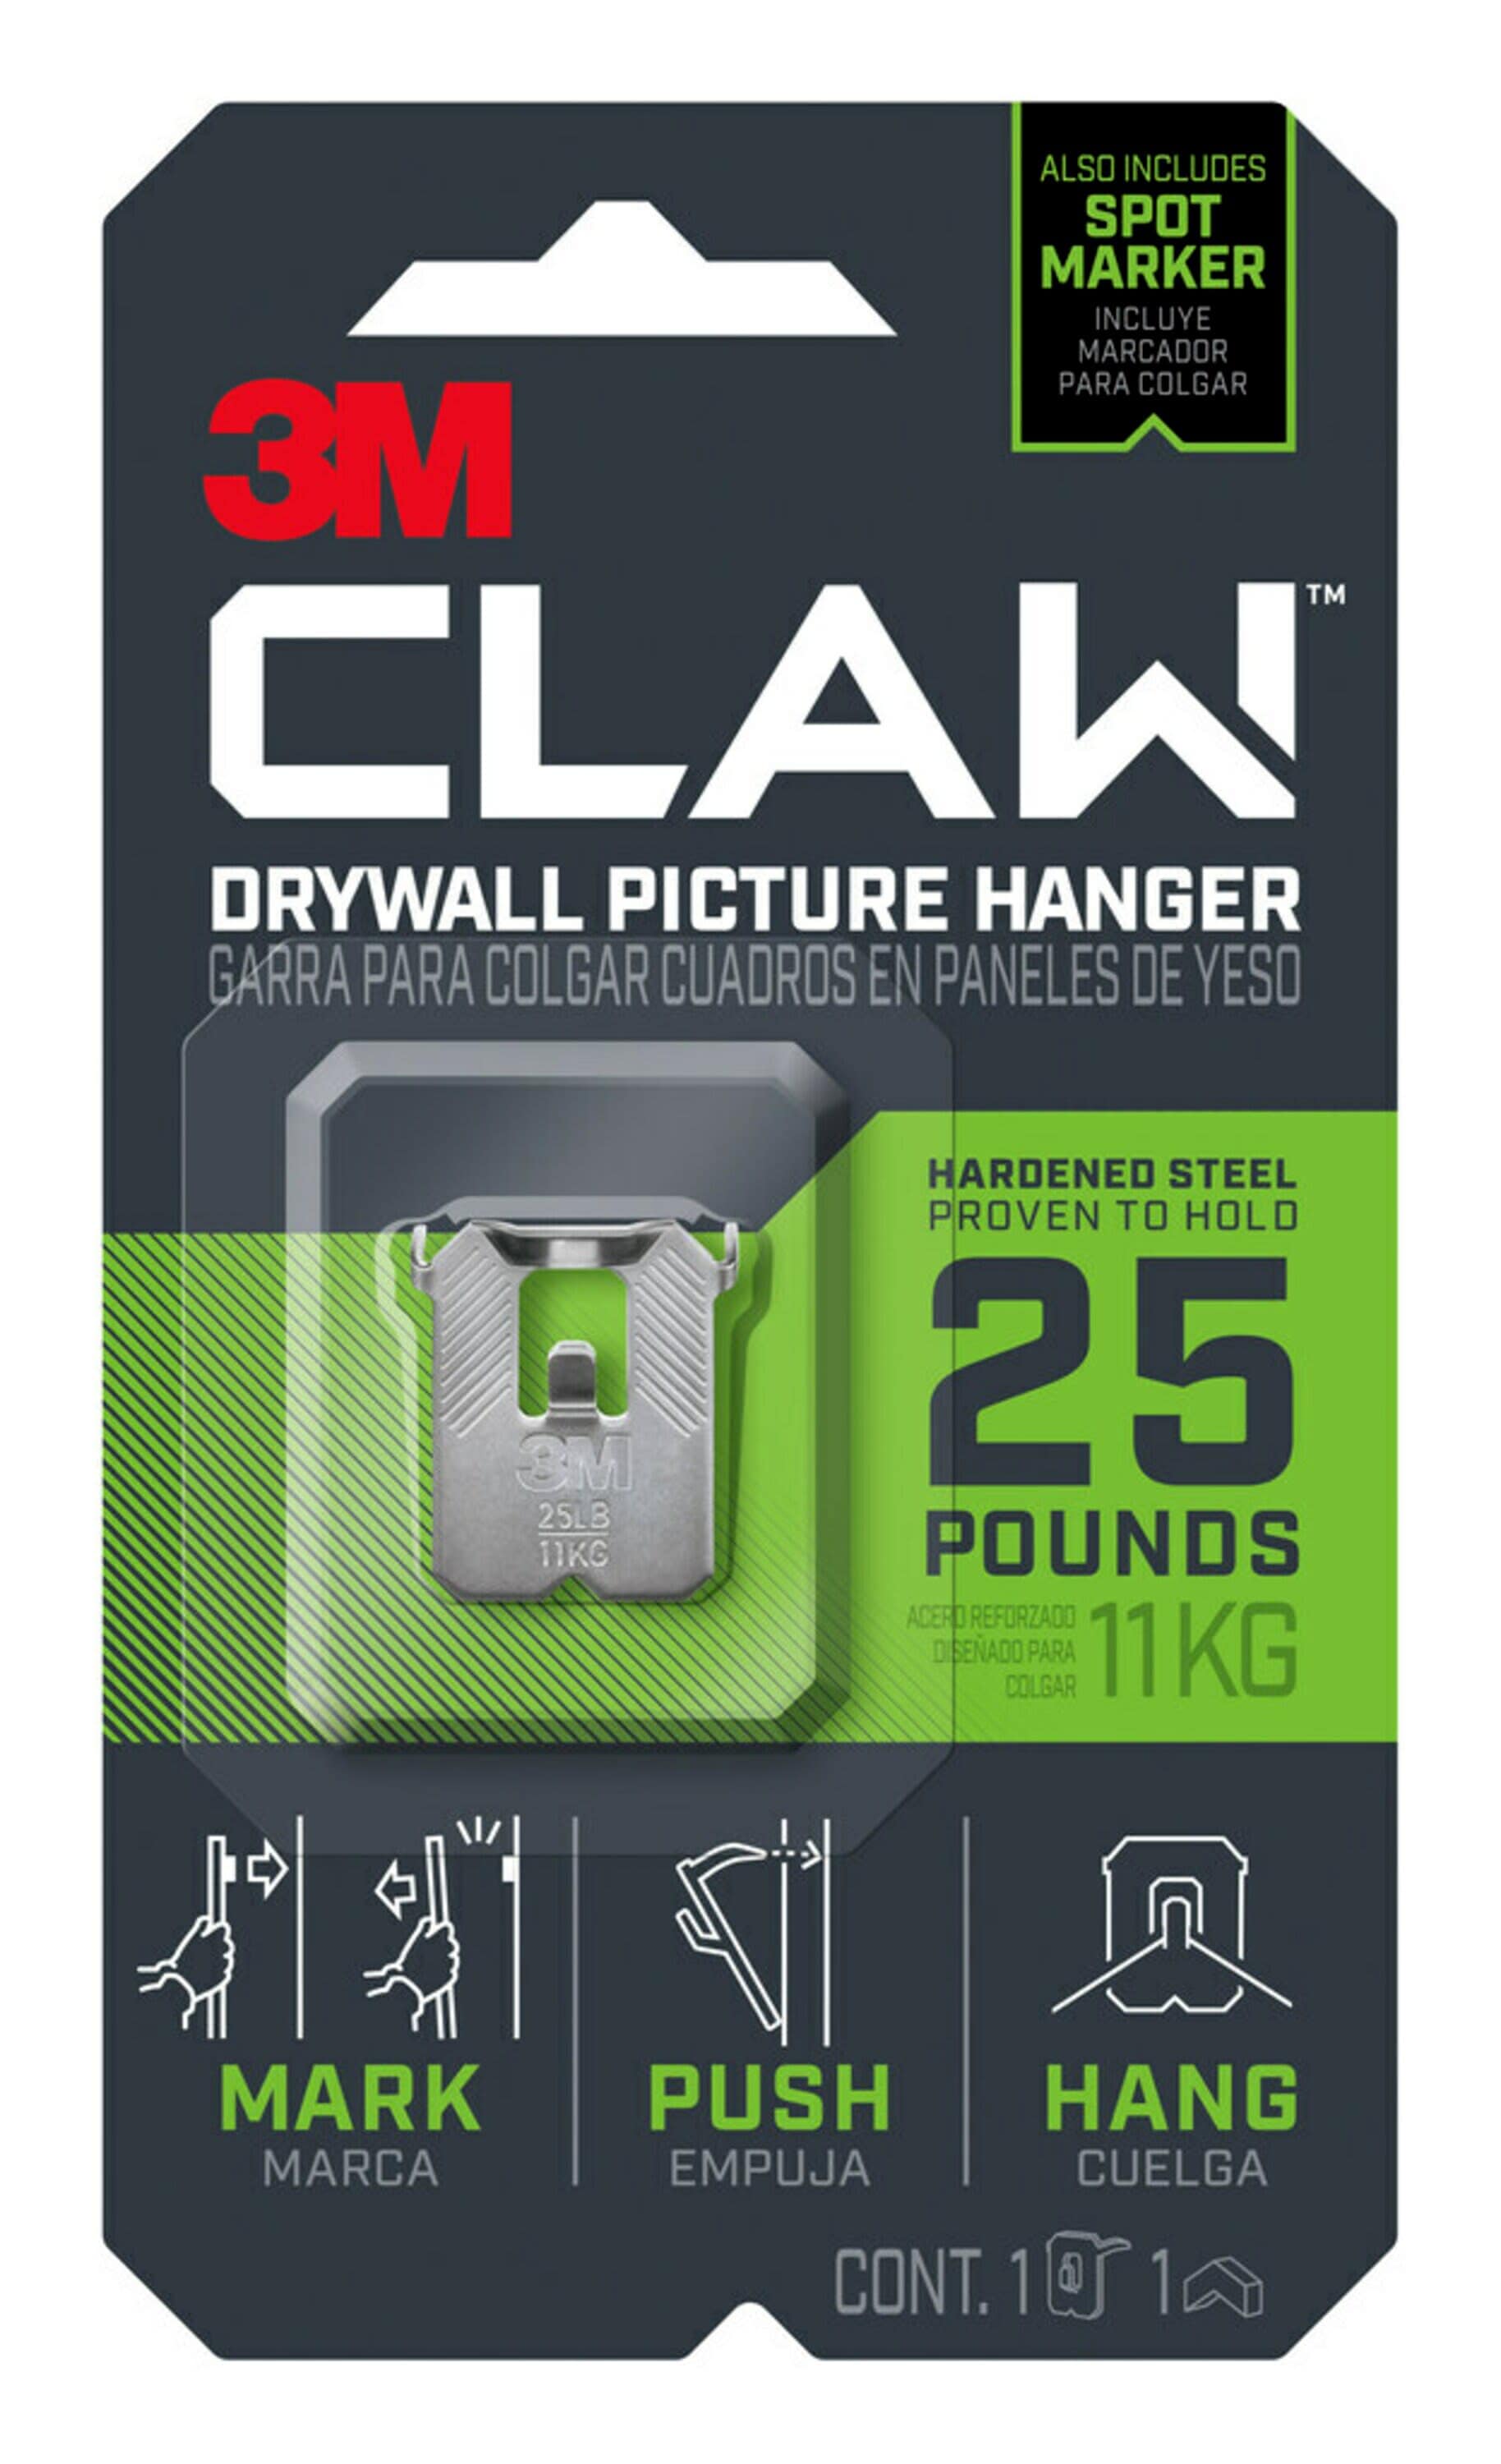 3M Claw 15 Lb. Drywall Picture Hanger with Temporary Spot Marker (5 Hangers,  5